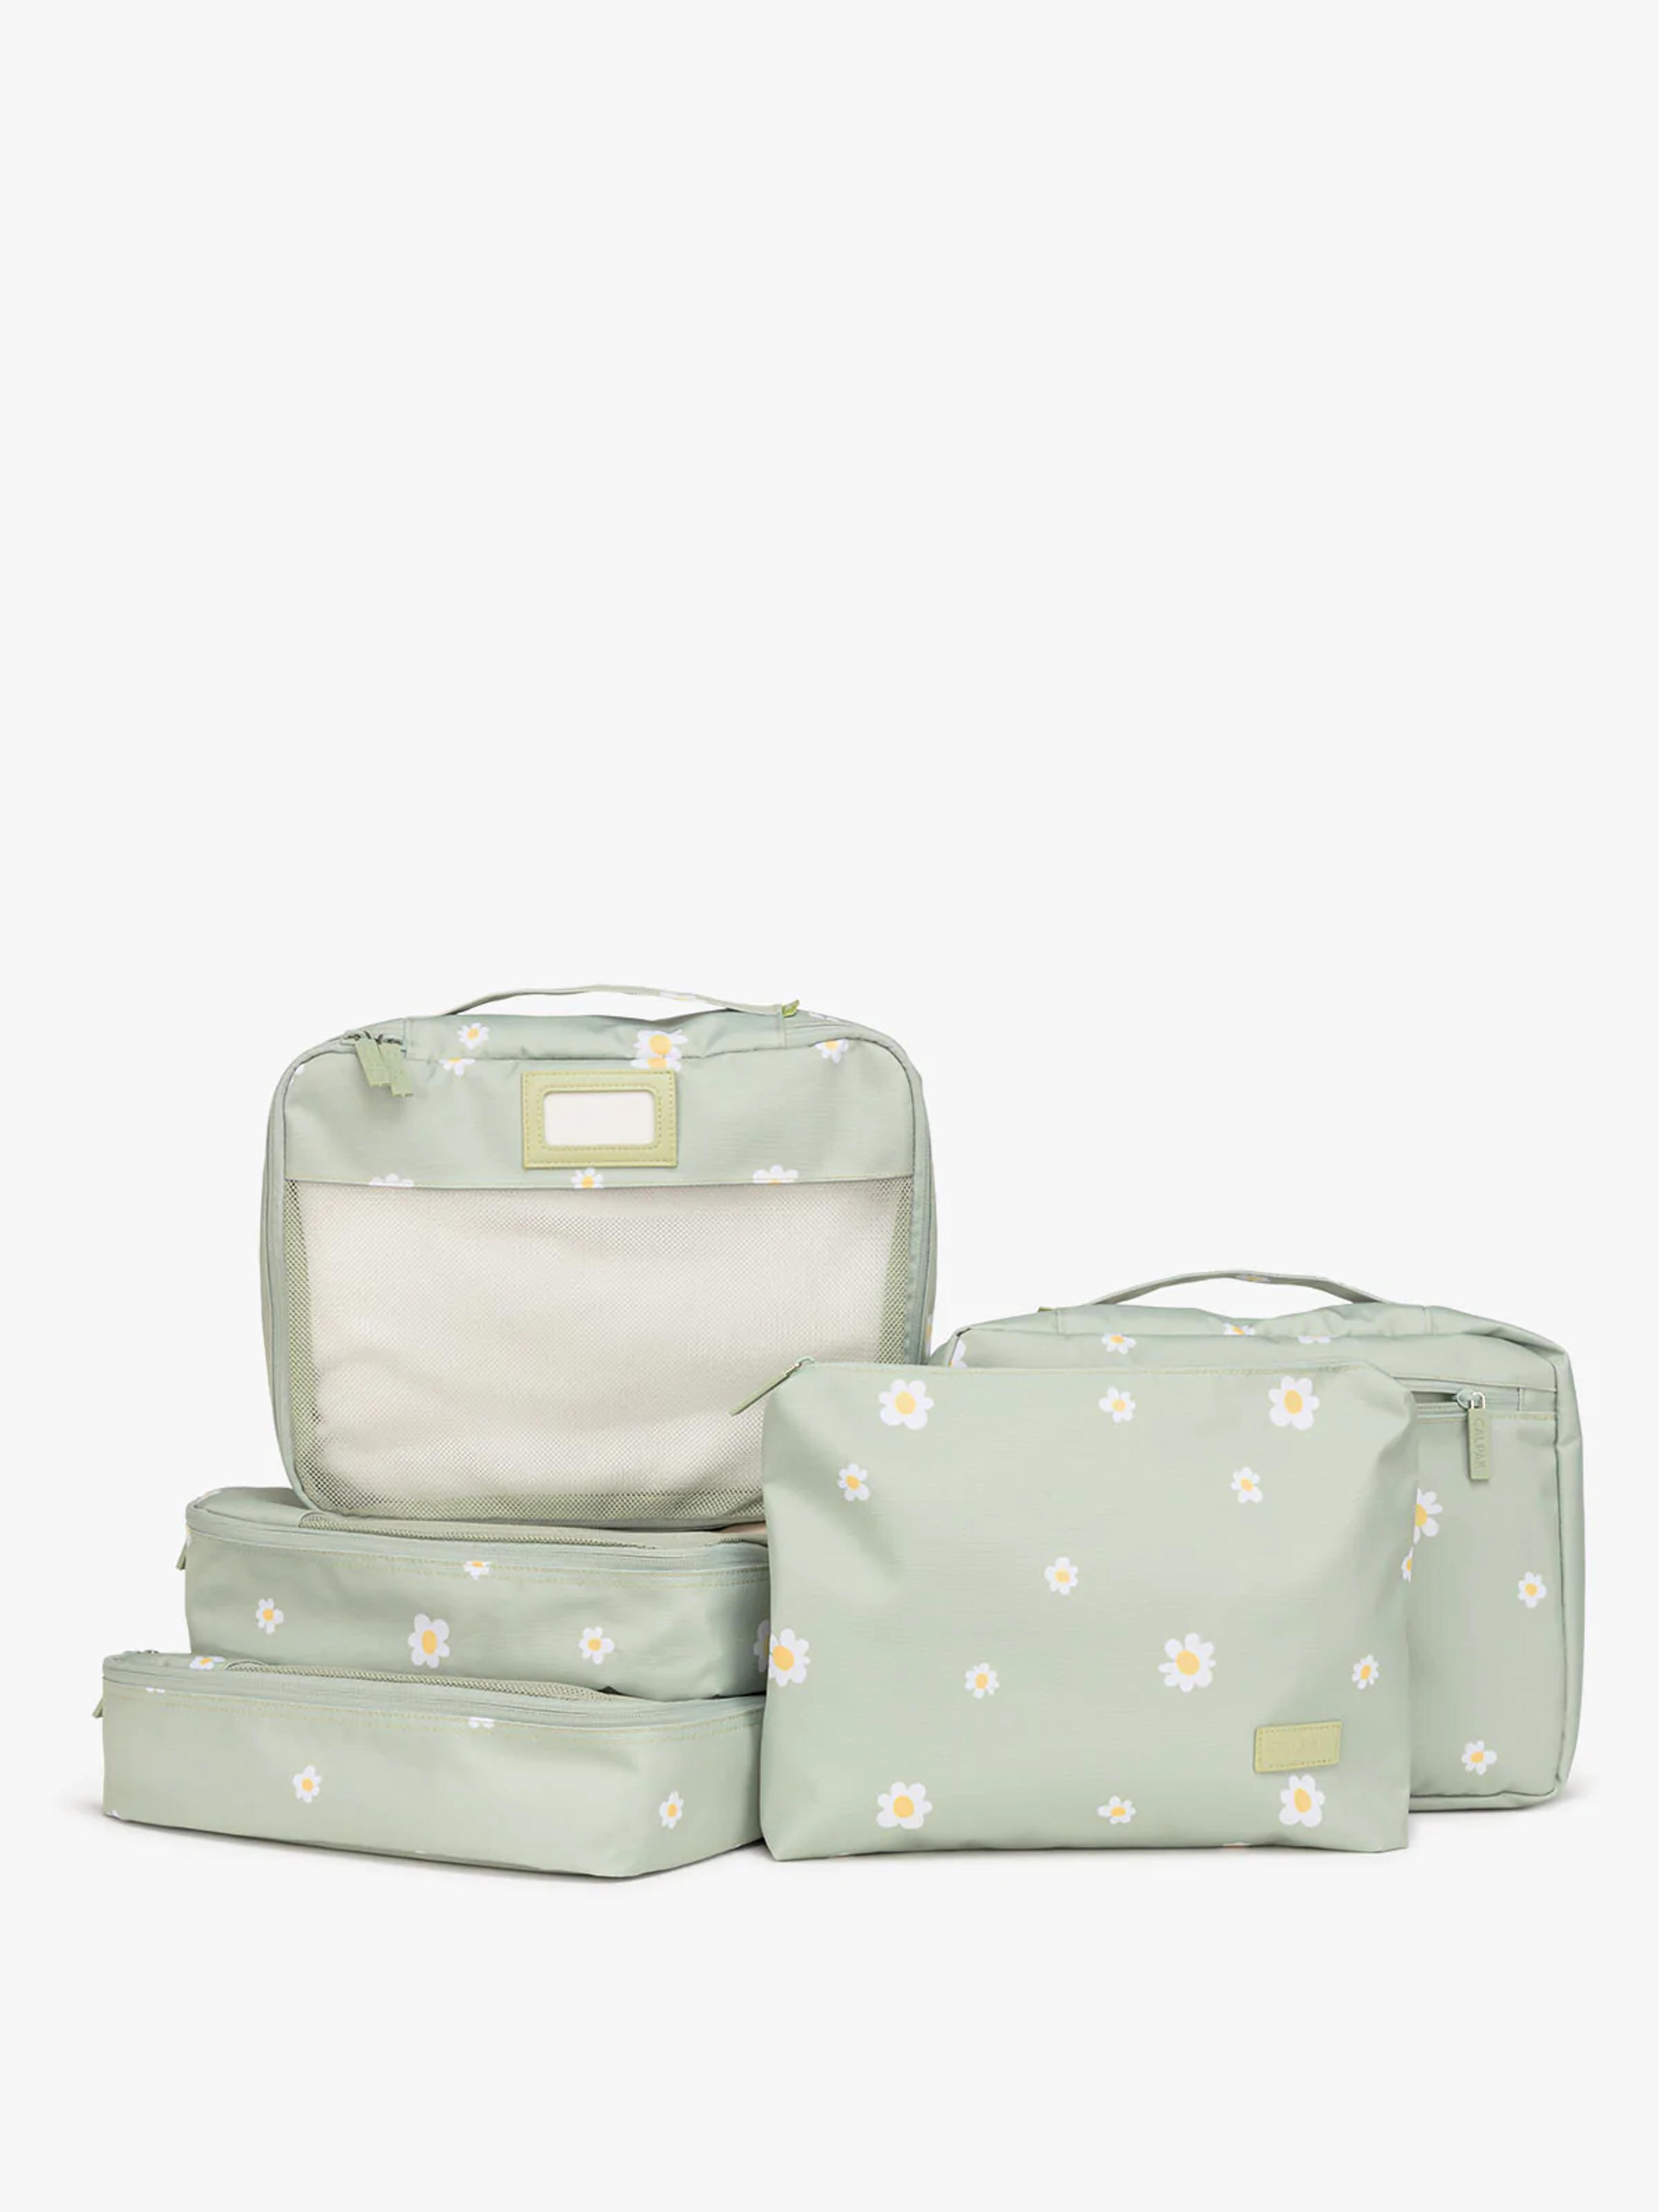 Packing Cubes 5-Piece Set - DAISY